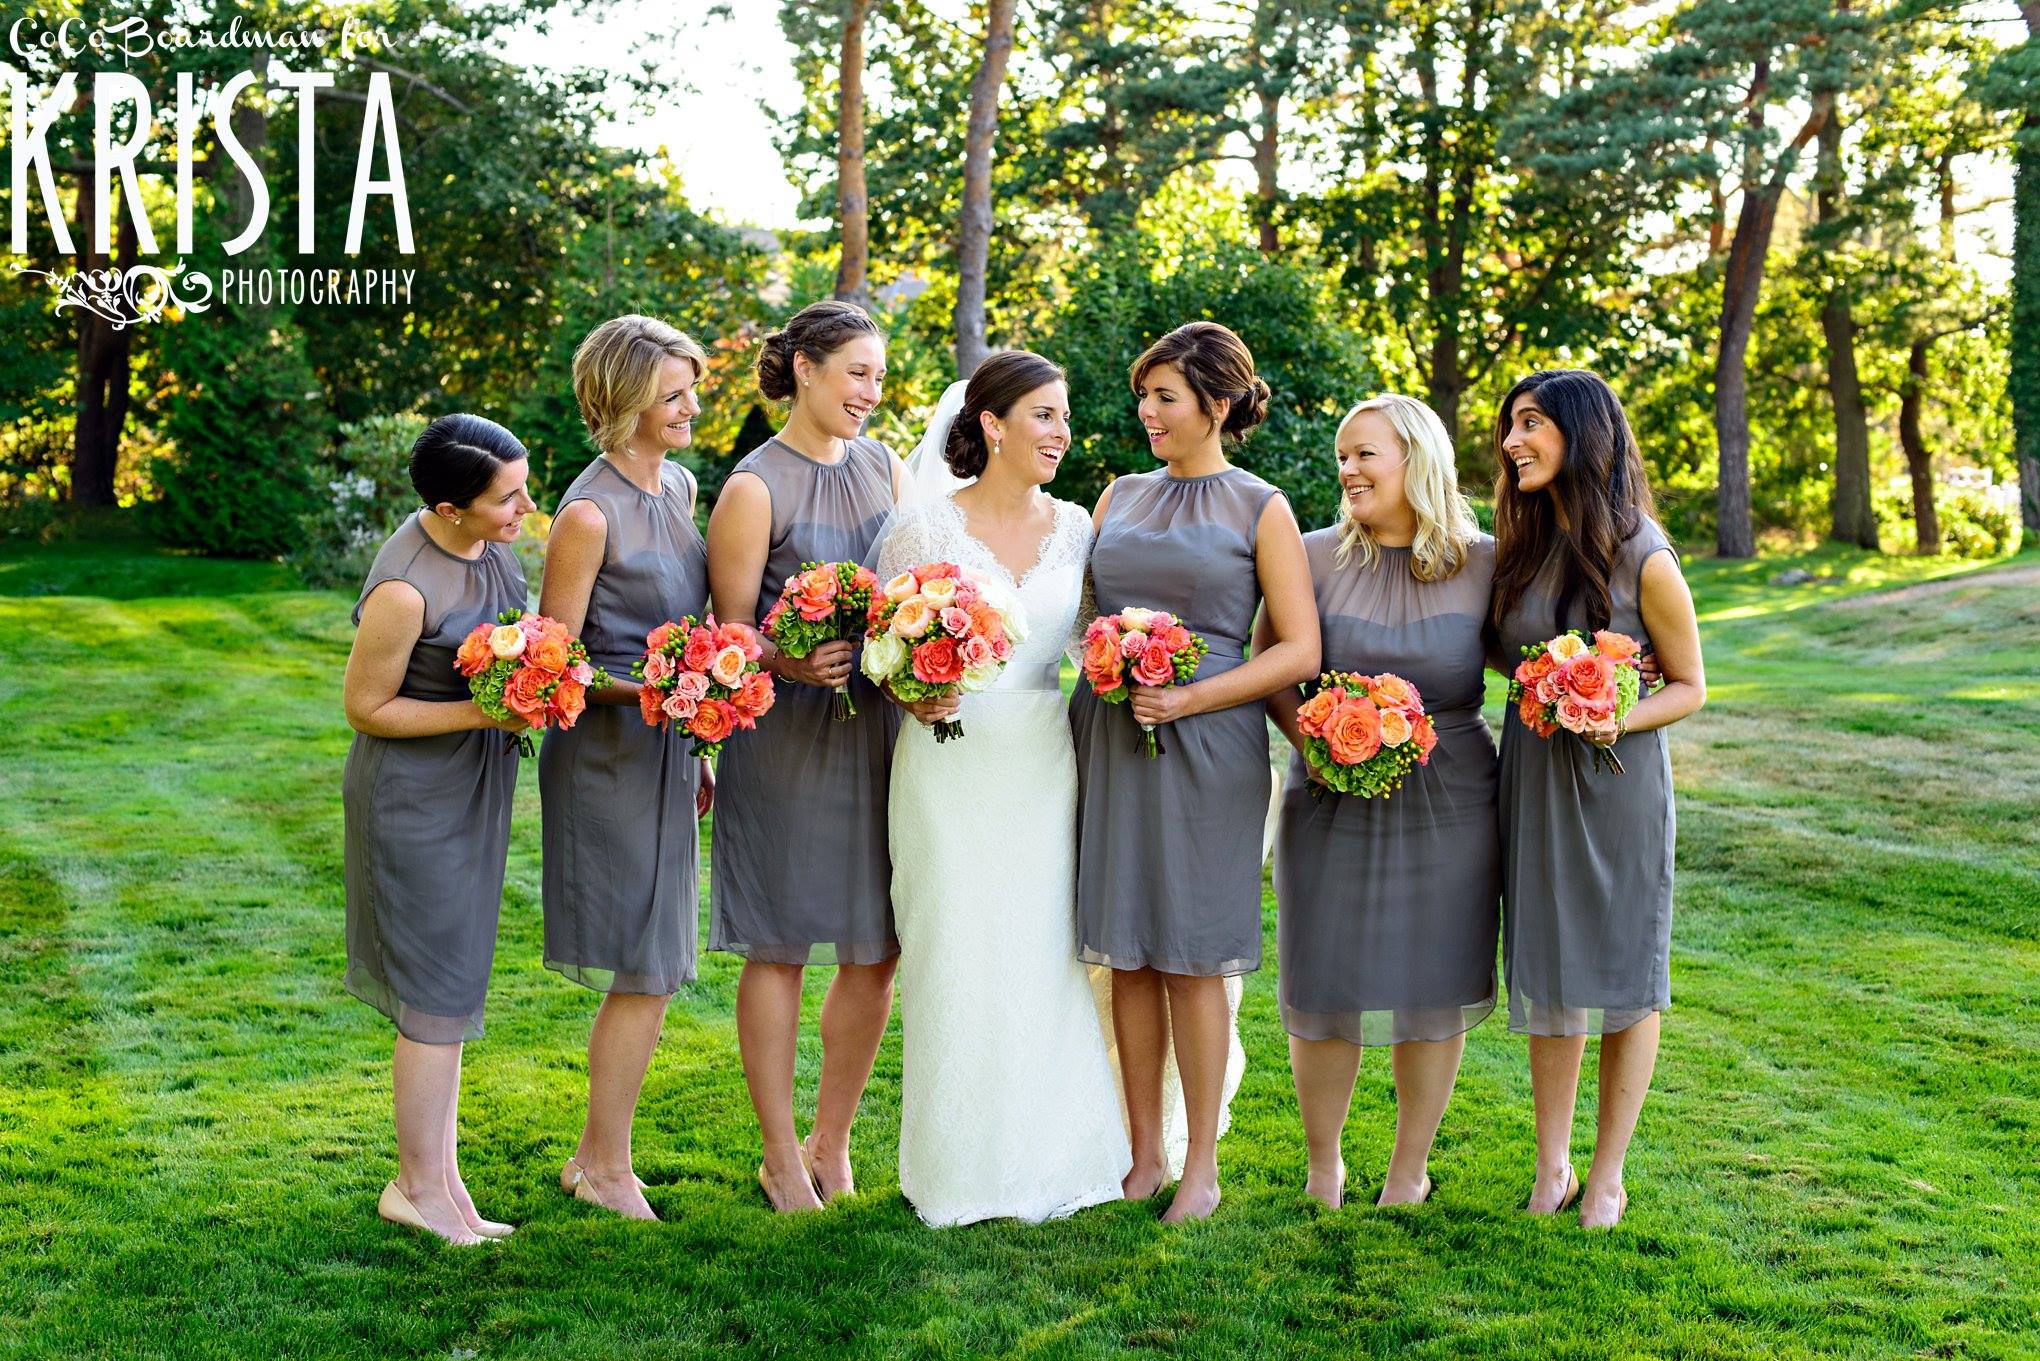 coral-bridal-bouquet-gray-bridesmaid-dresses-new-castle-nh-wedding-painter-ben-keys-wed-on-canvas